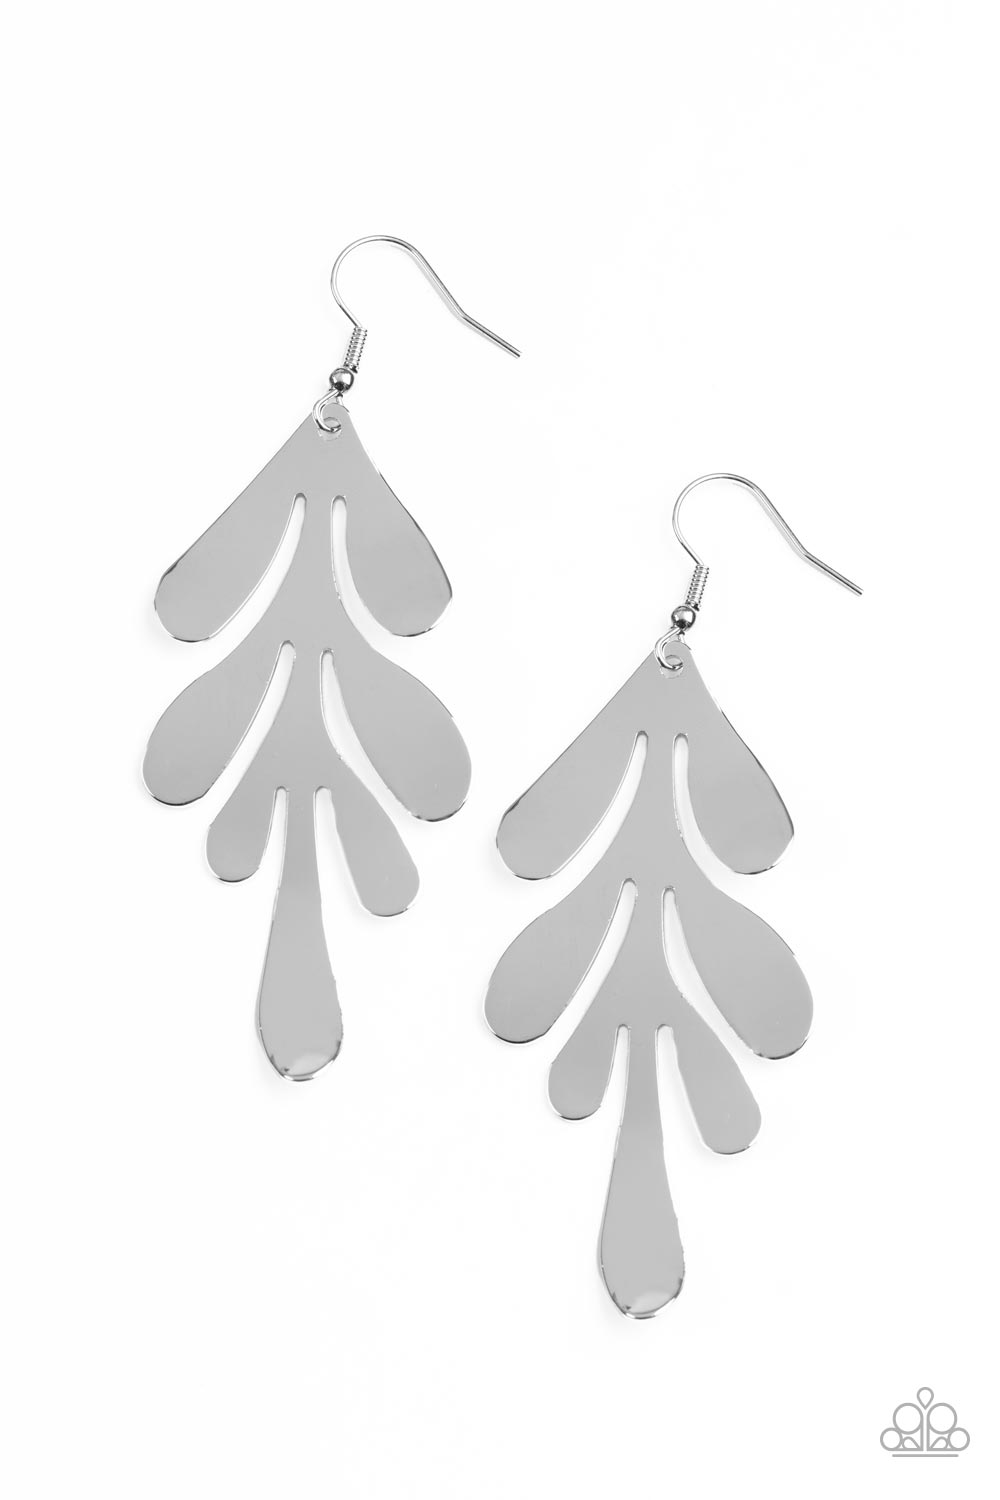 A FROND Farewell - Silver Earring